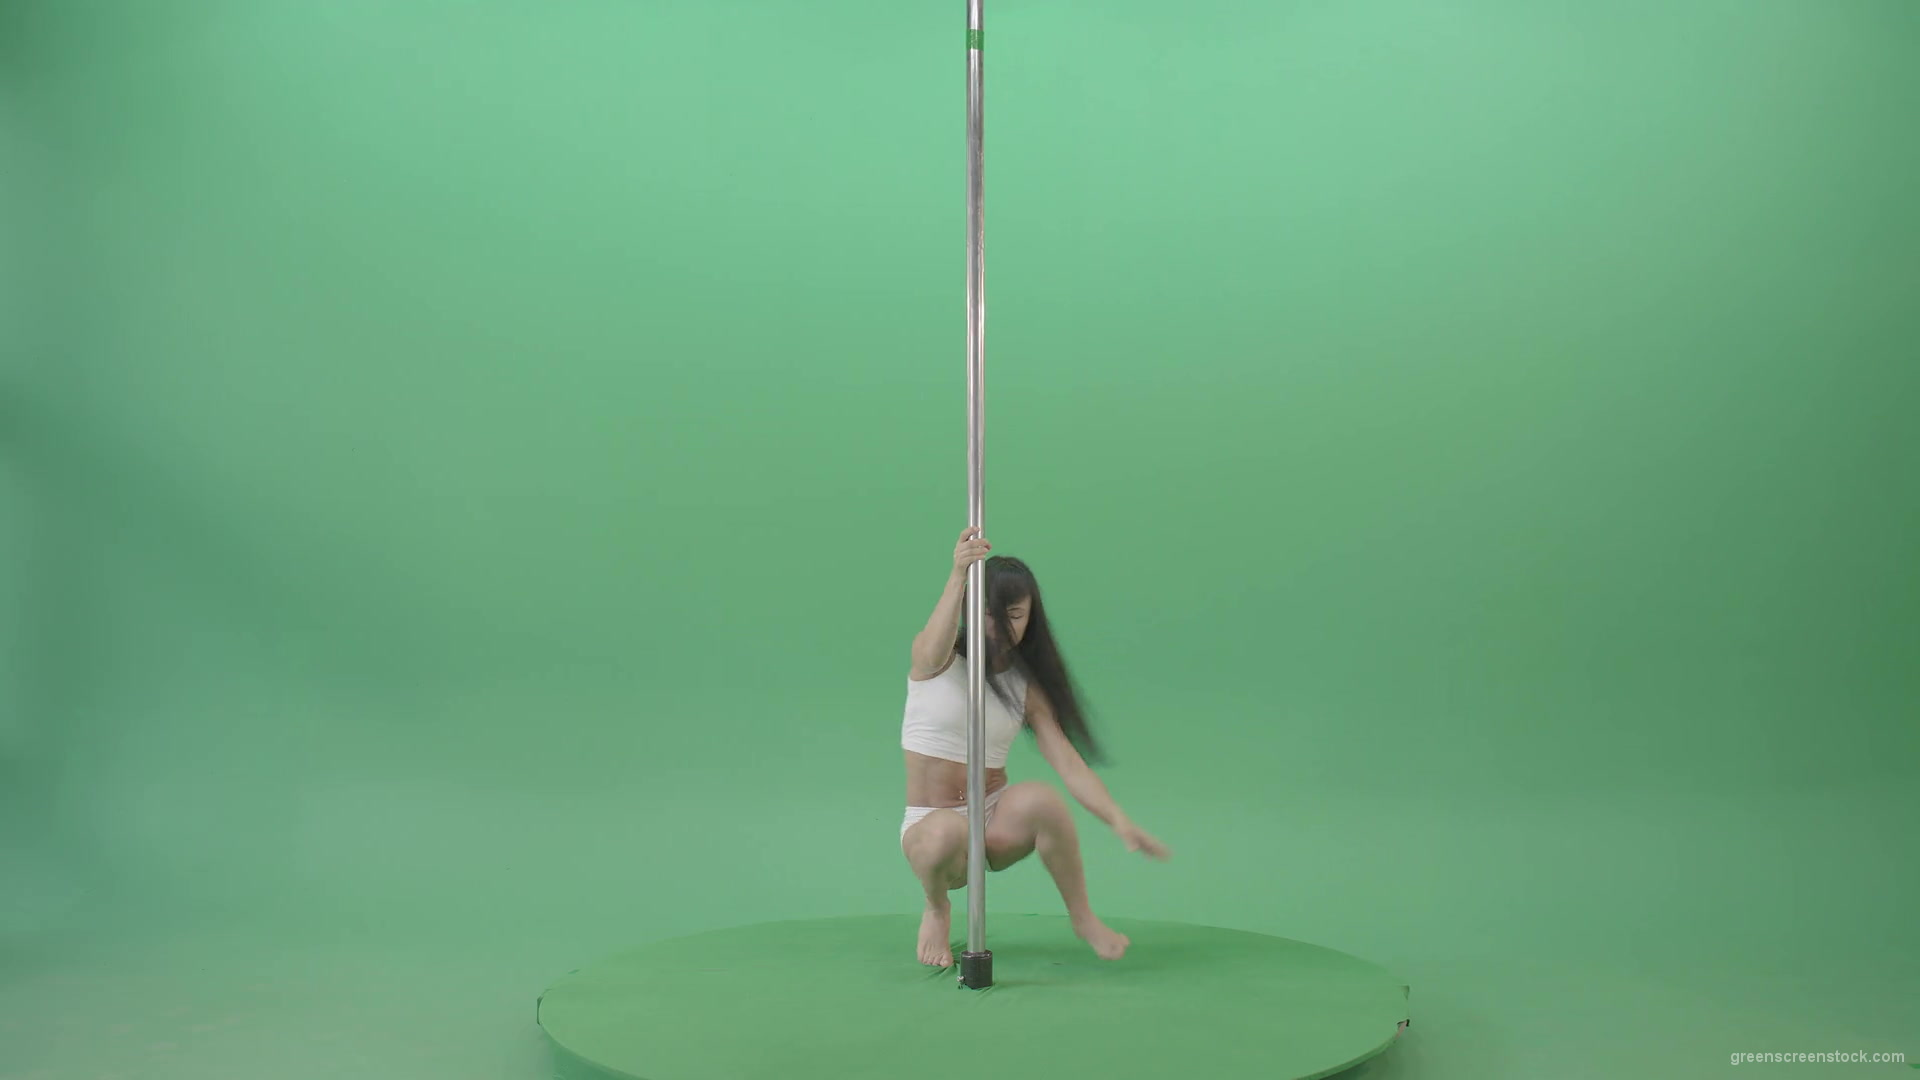 Sexy-moves-by-pole-dance-girl-dancing-on-green-screen-Video-Footage-1920_008 Green Screen Stock